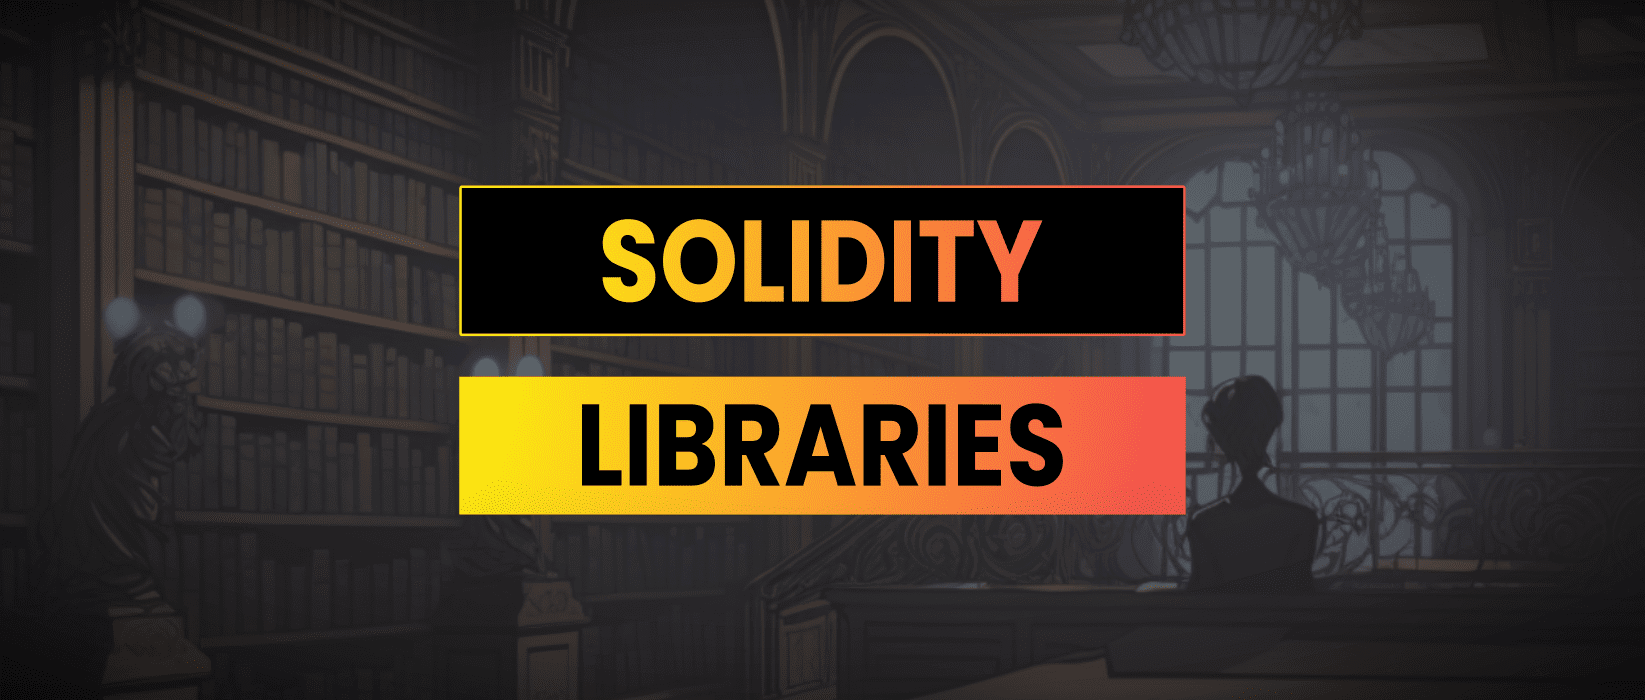 Solidity Library